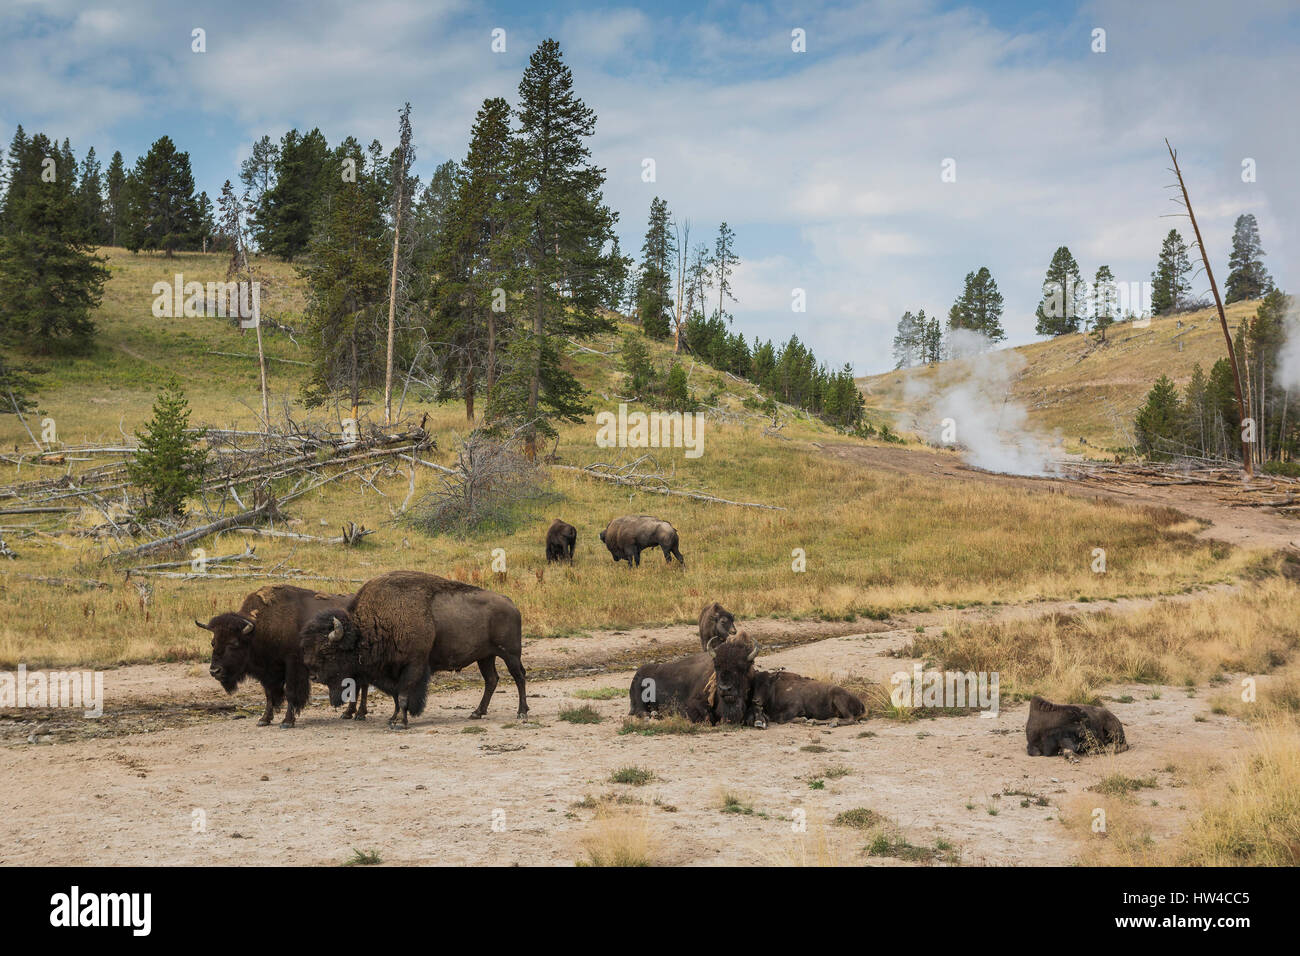 Bison in field near geyser, Yellowstone National Park, Wyoming, United States Stock Photo